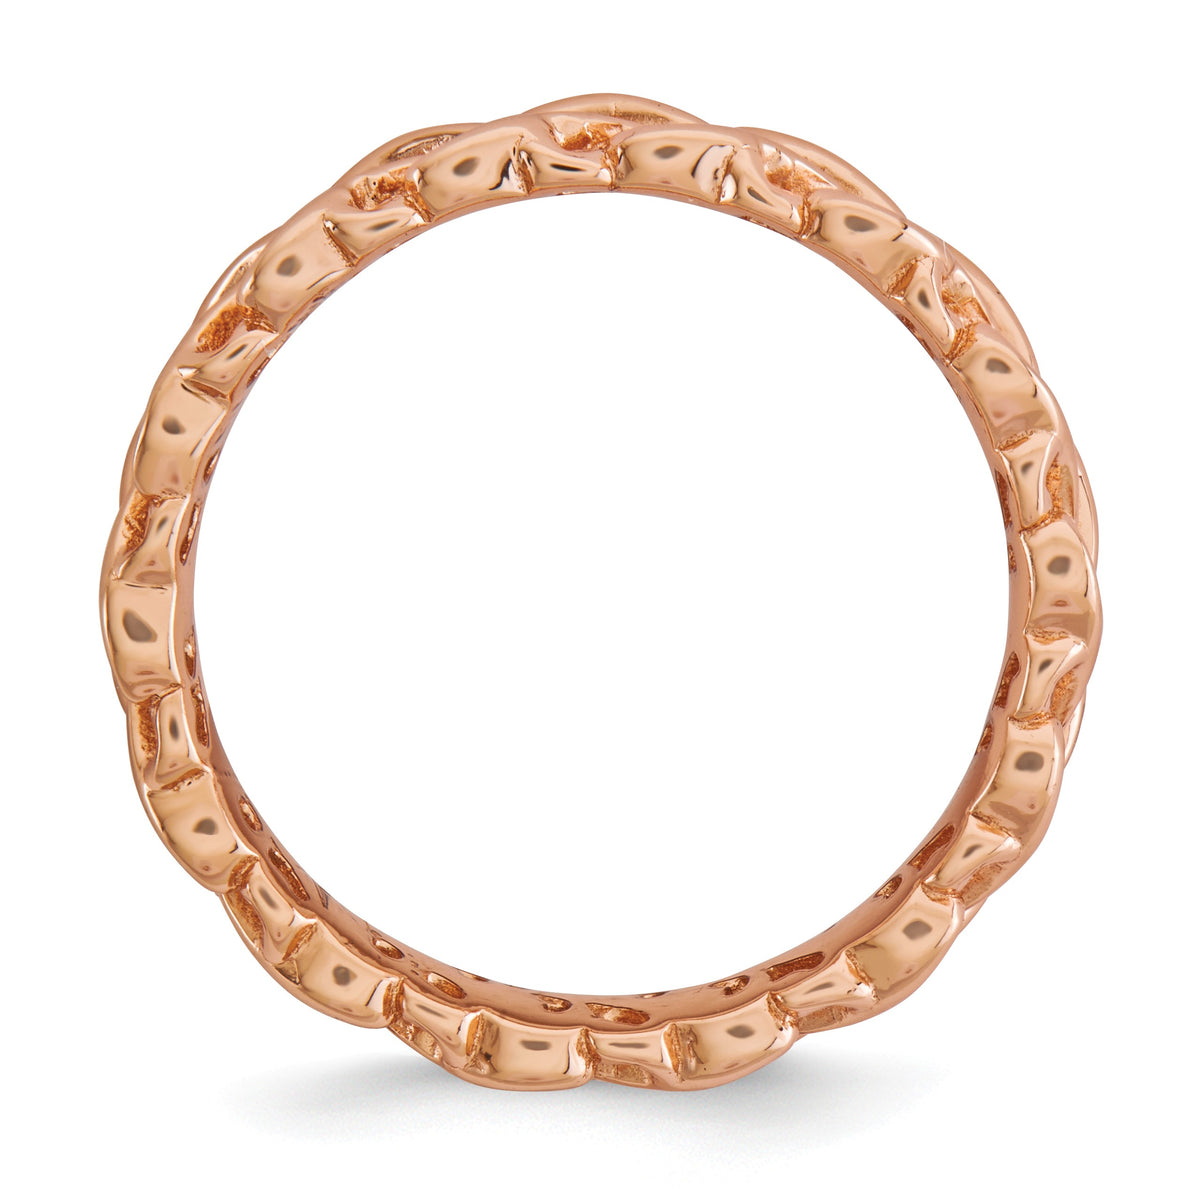 Alternate view of the 4.5mm Rose Gold Tone Plated Sterling Silver StackableCarved Heart Band by The Black Bow Jewelry Co.